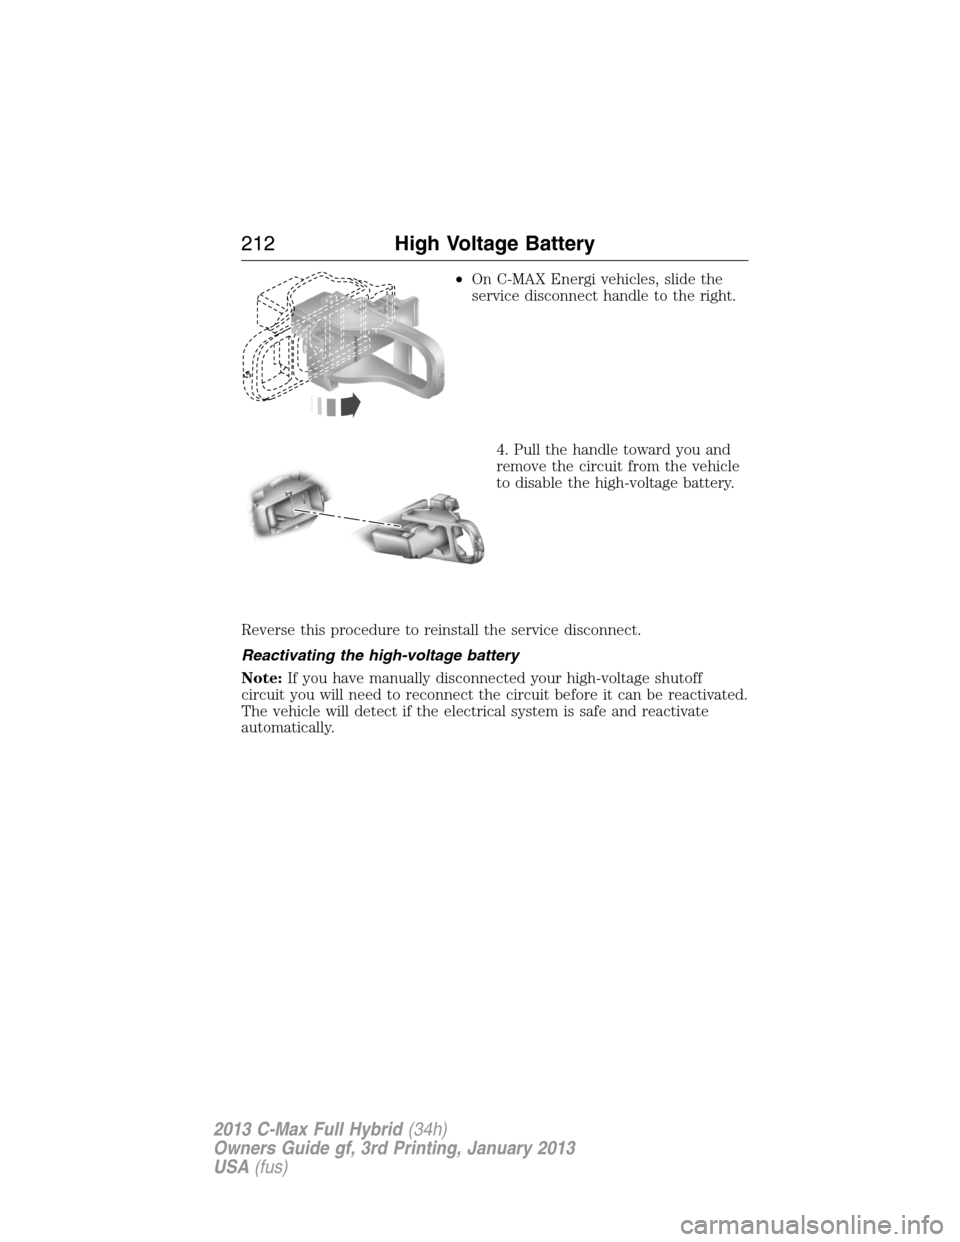 FORD C MAX HYBRID 2013 2.G Service Manual •On C-MAX Energi vehicles, slide the
service disconnect handle to the right.
4. Pull the handle toward you and
remove the circuit from the vehicle
to disable the high-voltage battery.
Reverse this p